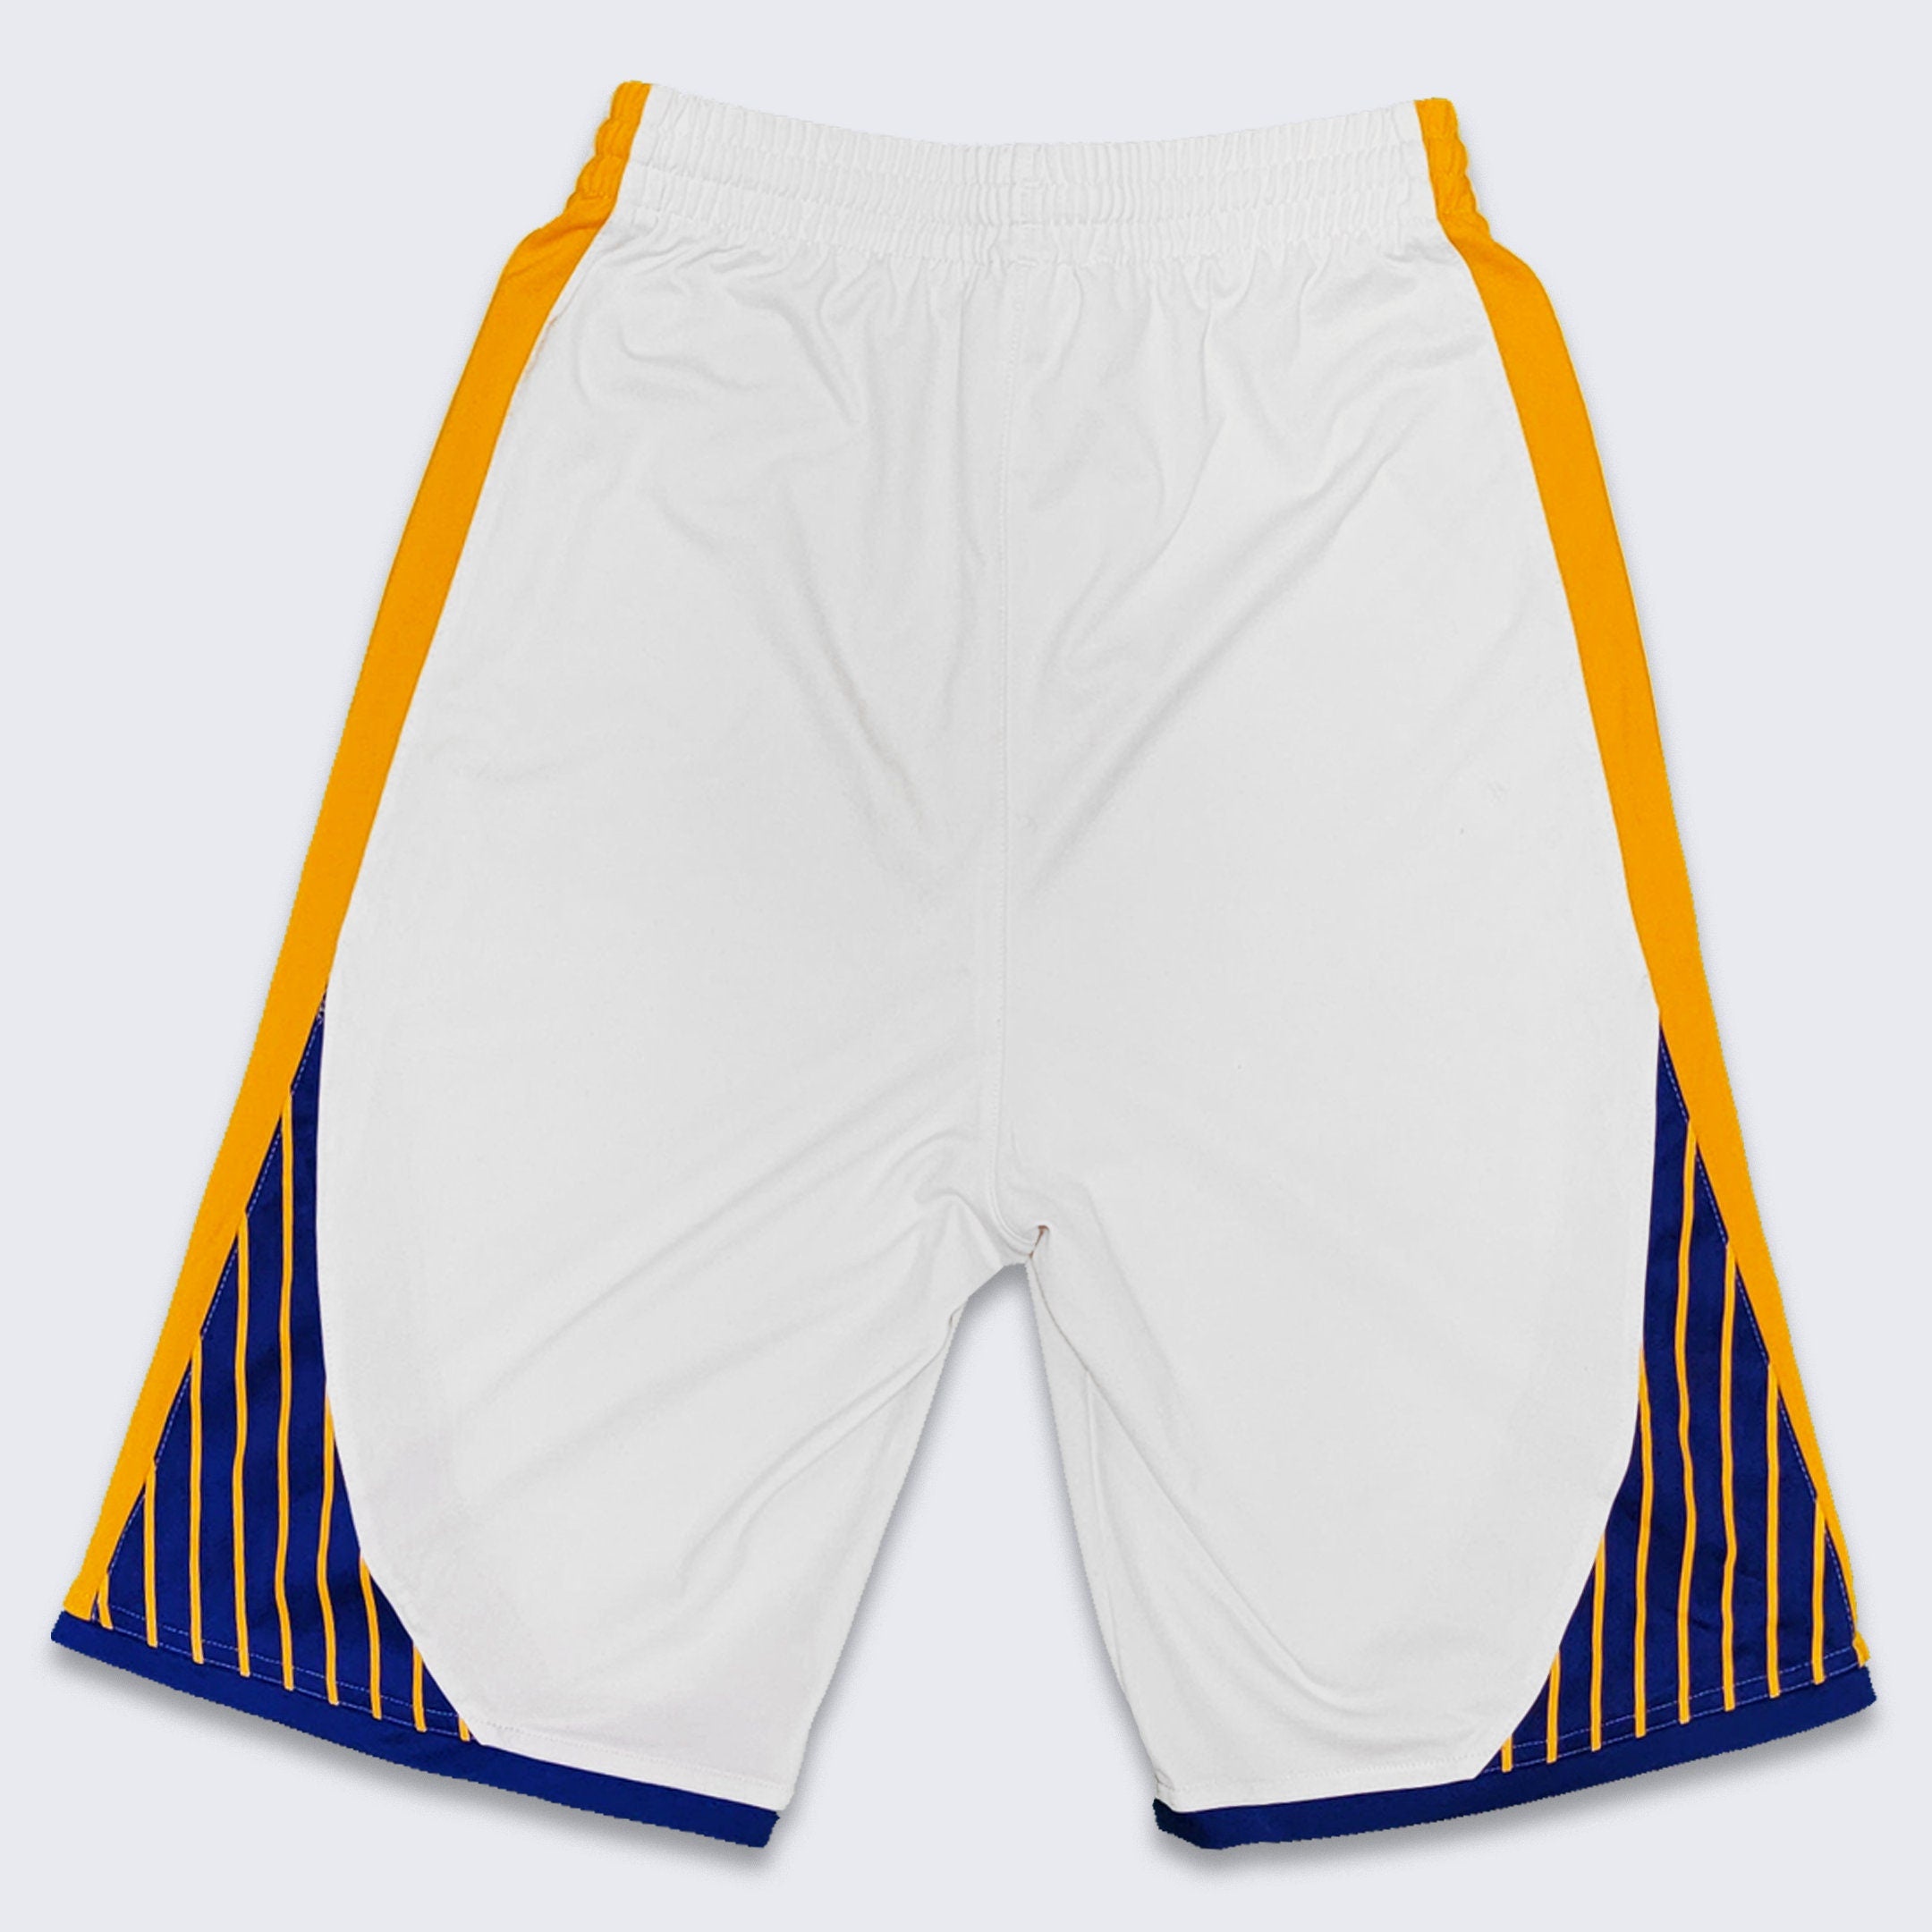  adidas NBA Golden State Warriors Youth Replica Shorts - Blue  Boys 8-20 (Youth XL 18) : Sports & Outdoors